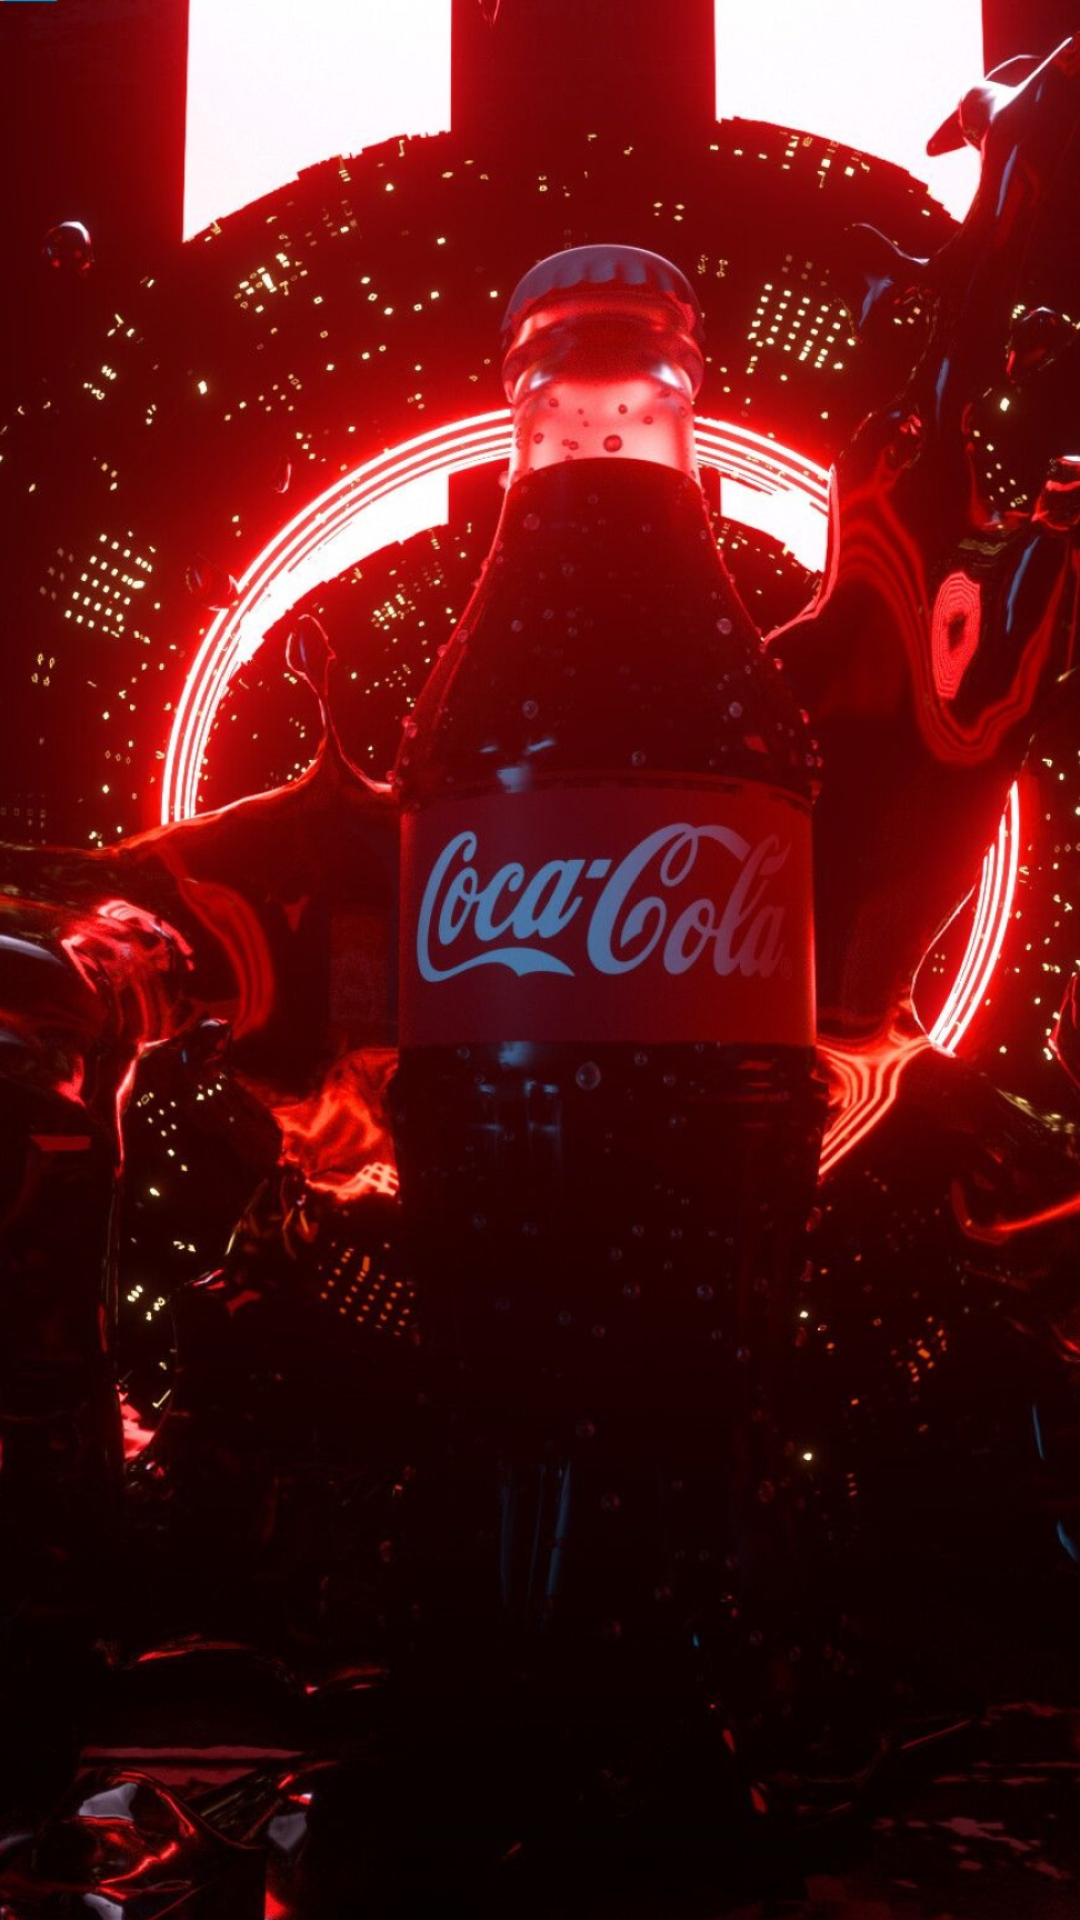 Coca-Cola: An American multinational corporation founded in 1892. 1080x1920 Full HD Background.